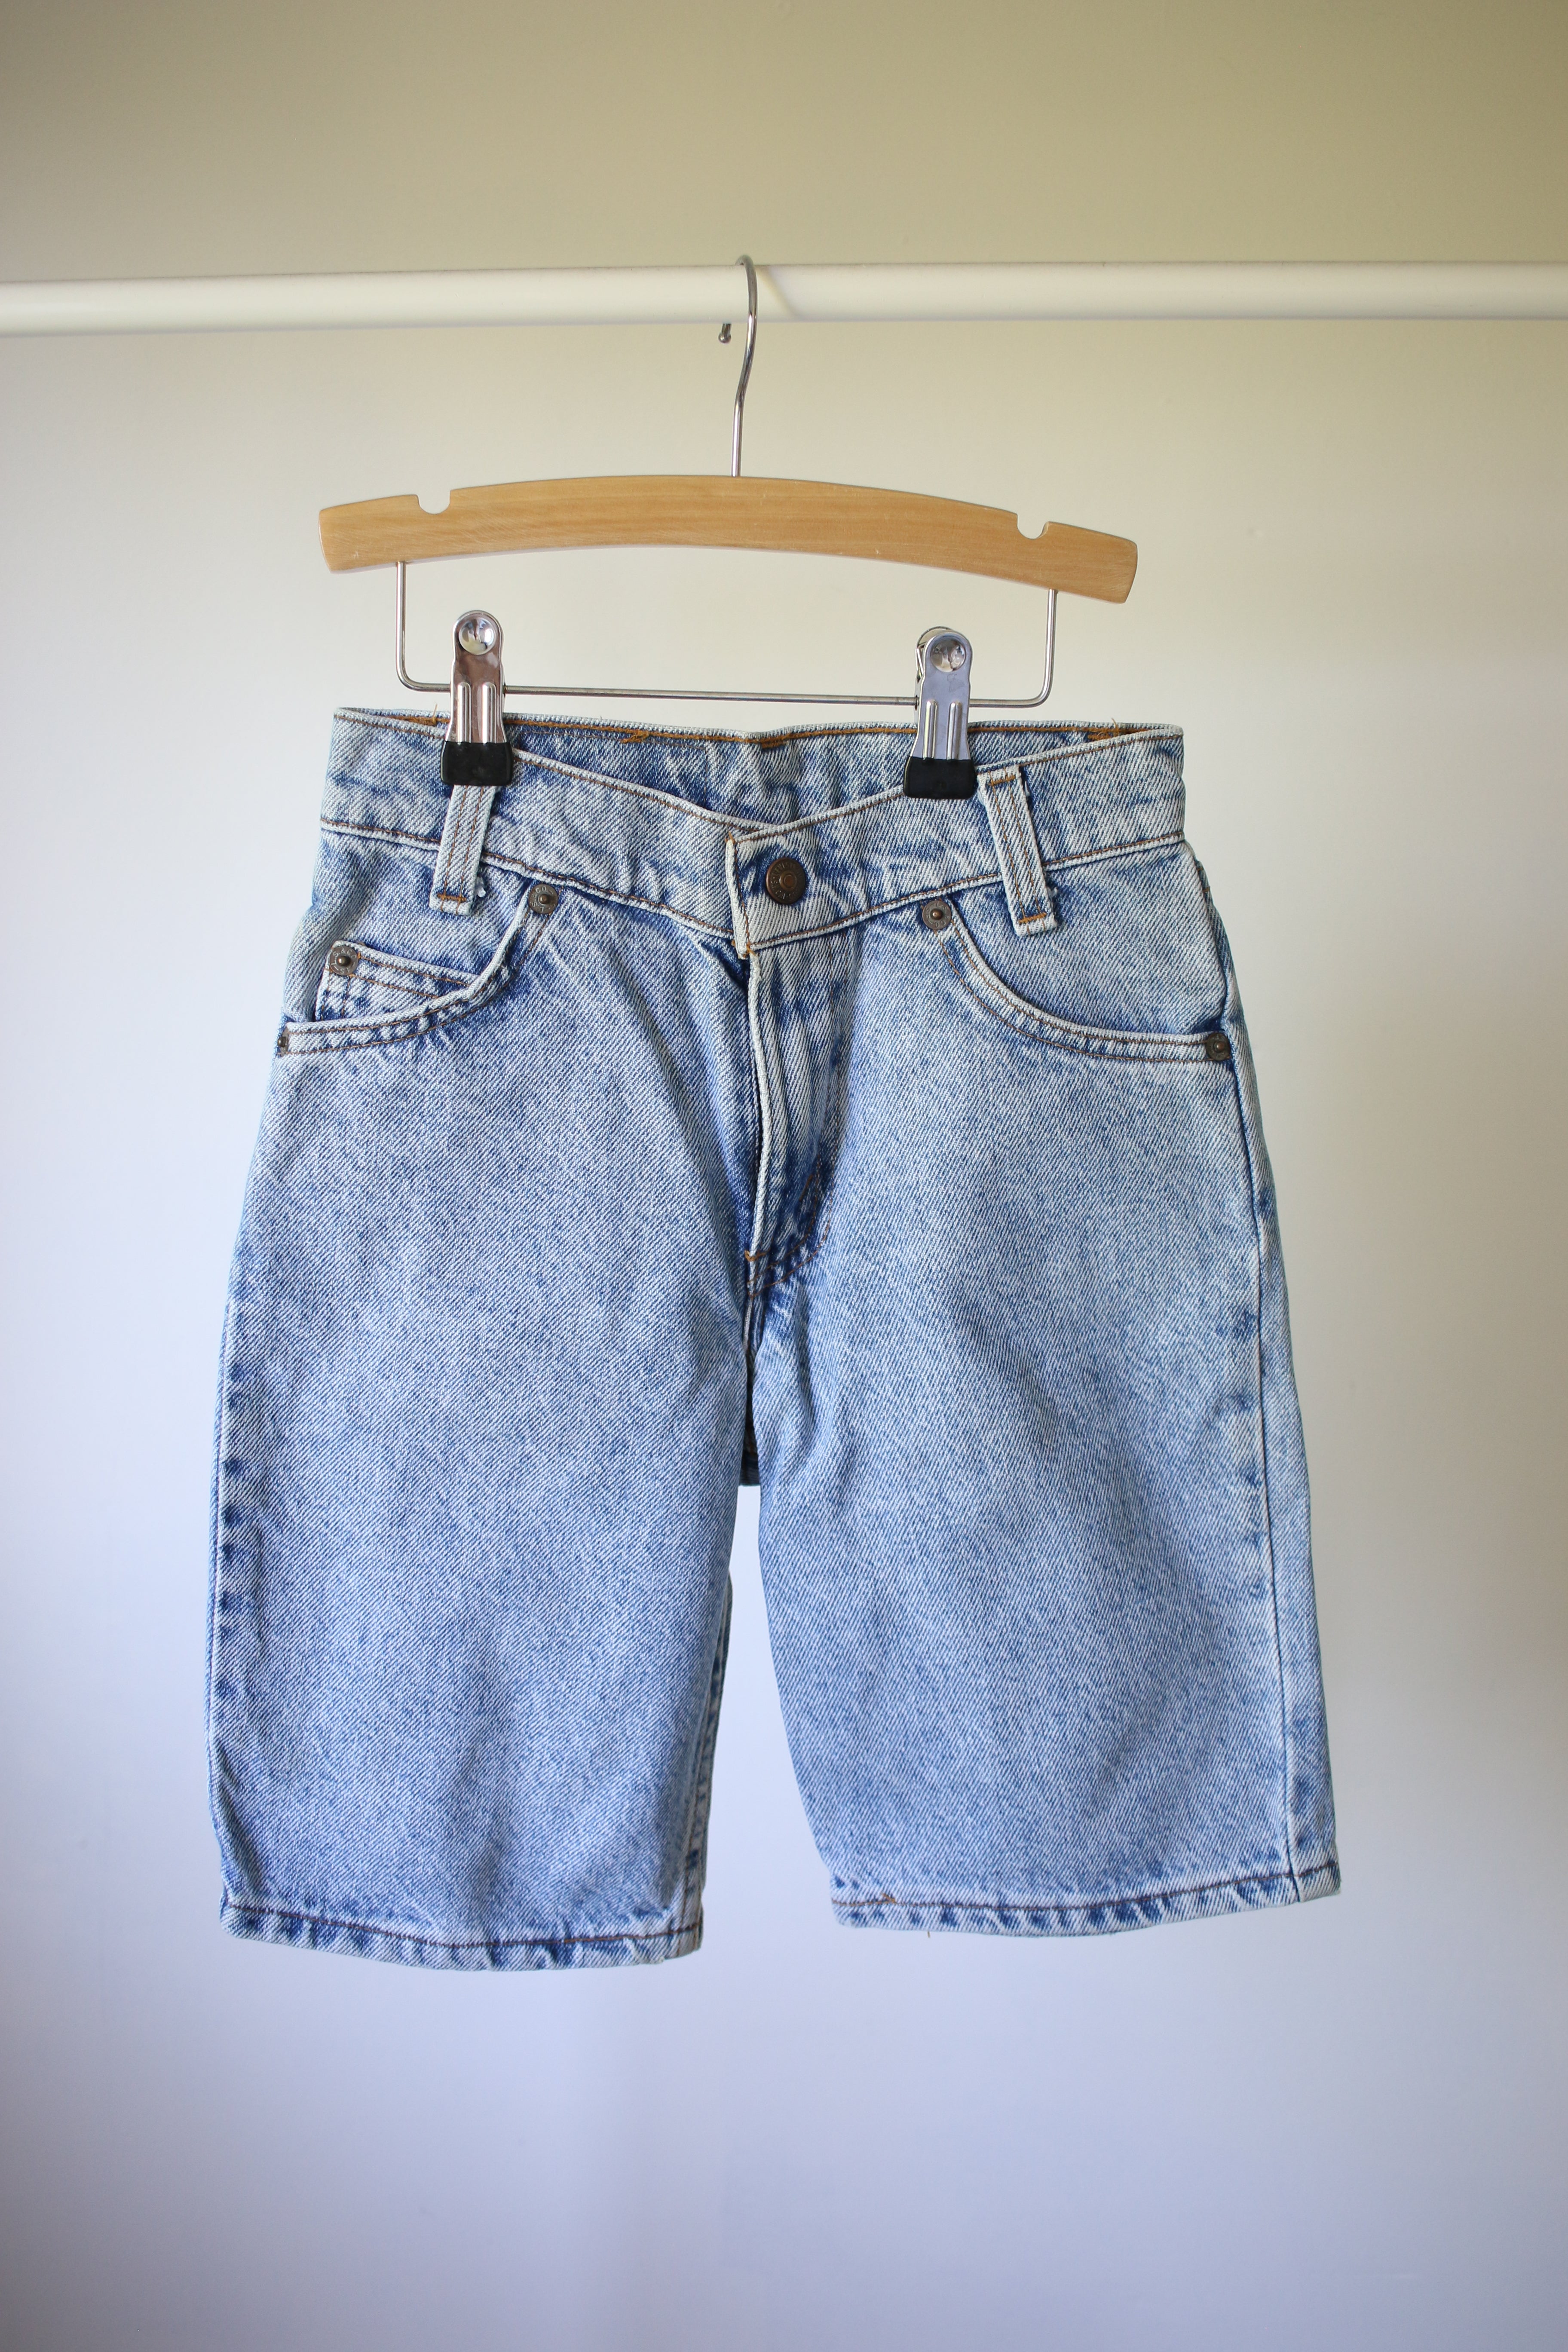 Vintage Orange Tab Levi's shorts  - size 7-8 years  - made in USA